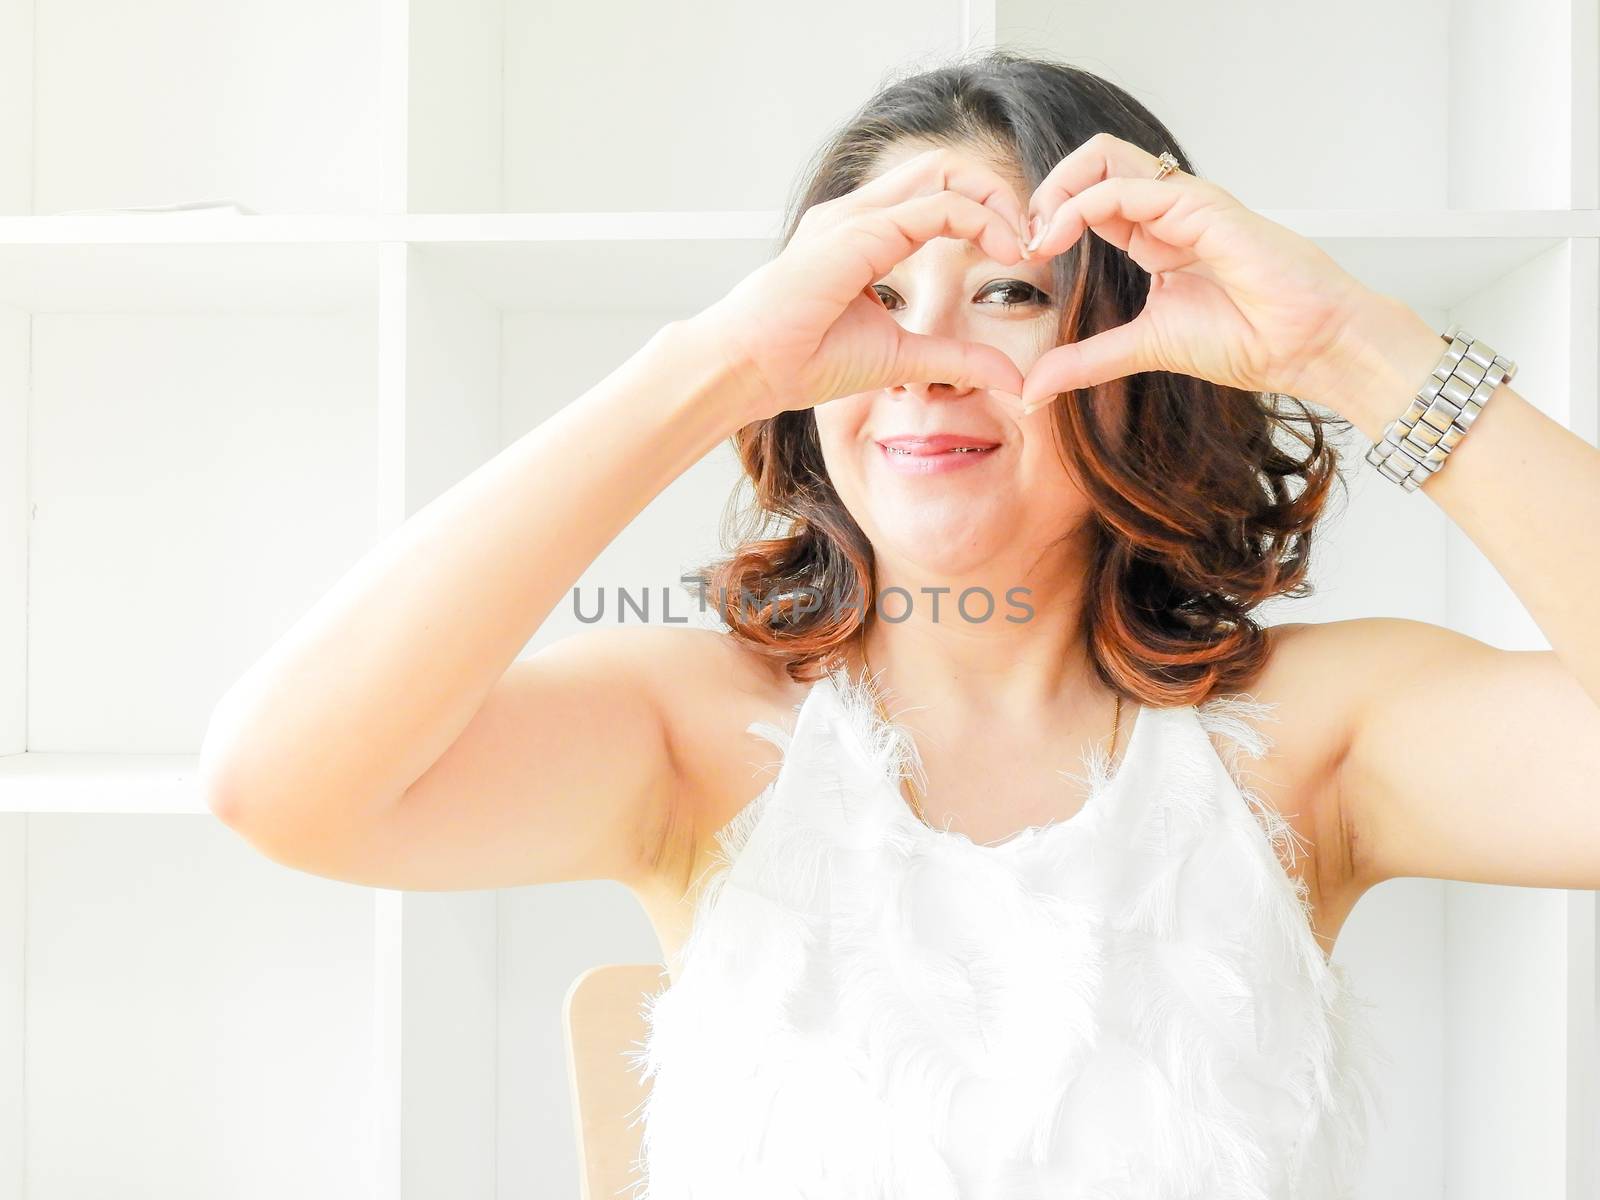 Pretty woman with smiley happy face making heart shape by her ha by yuiyuize